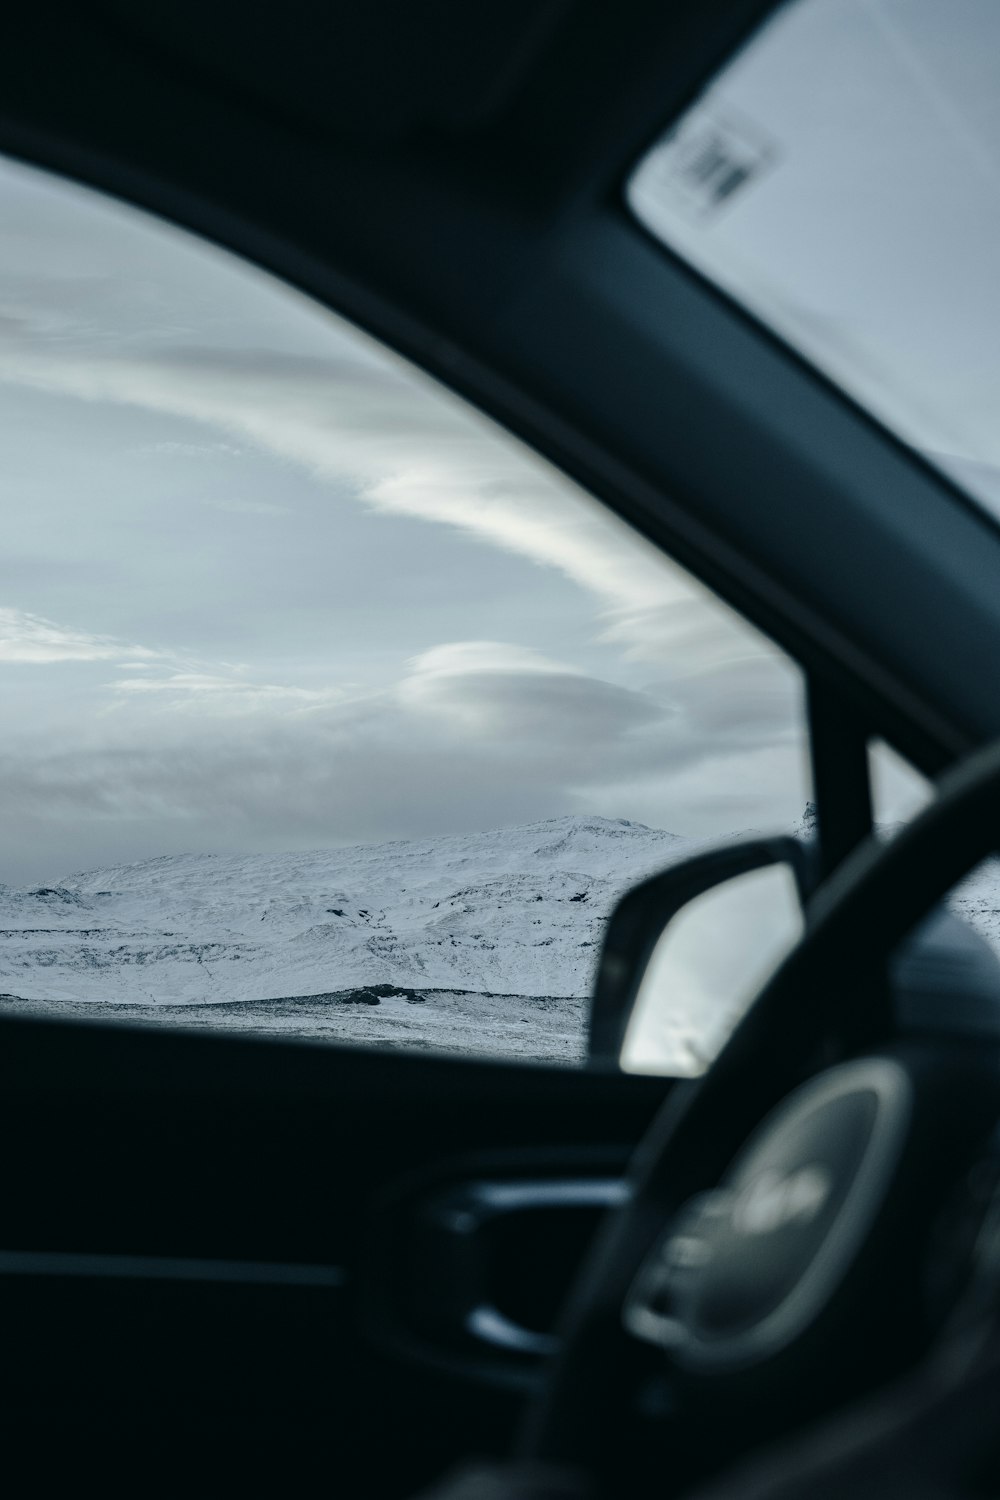 a view of a snowy mountain from inside a car